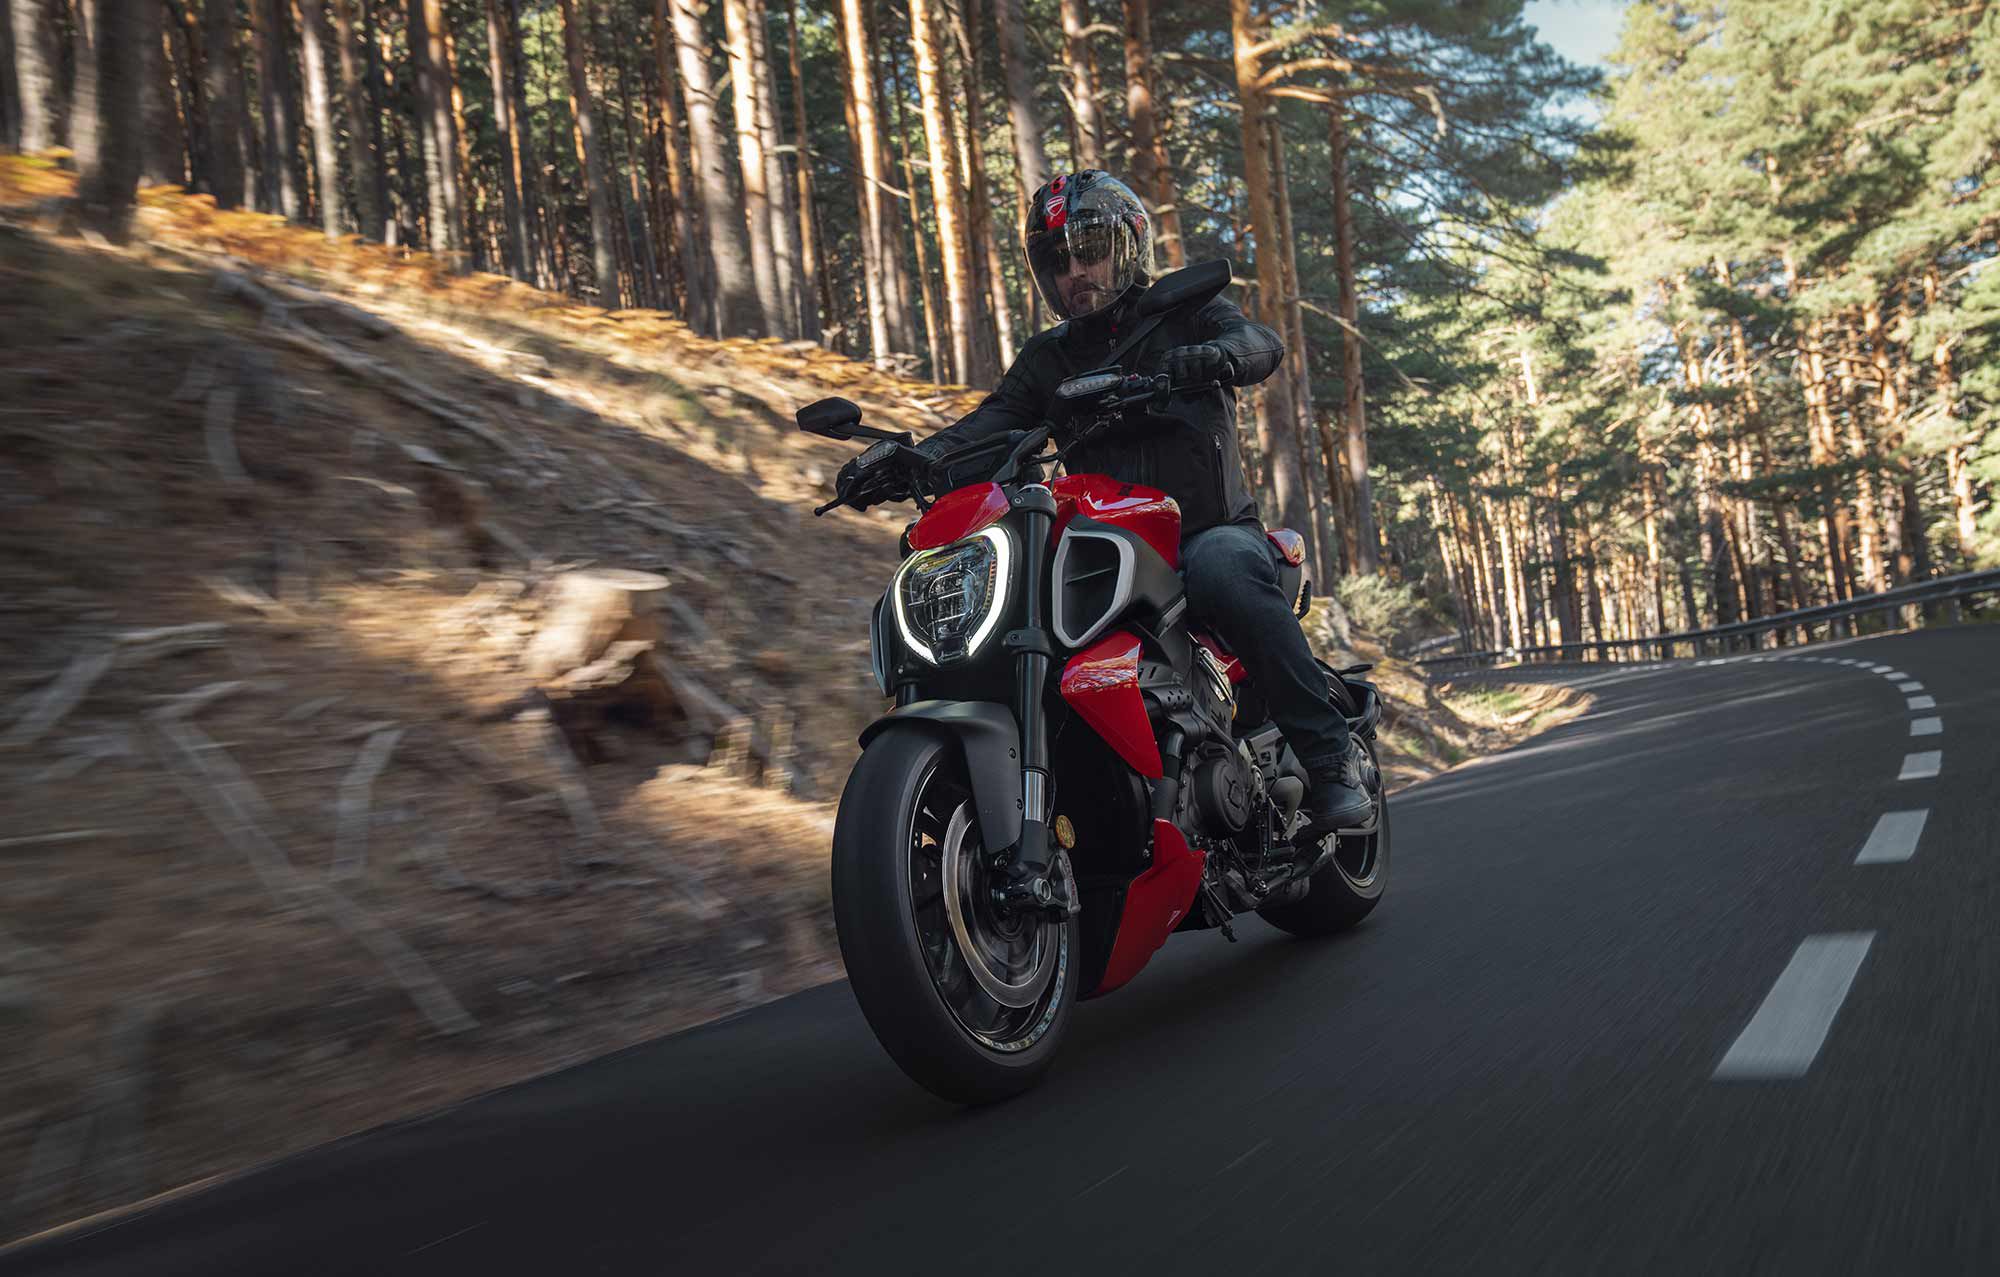 Few bikes will attract as much attention as the Diavel V4, and have the ability to back up their appearance with real-world performance to match.